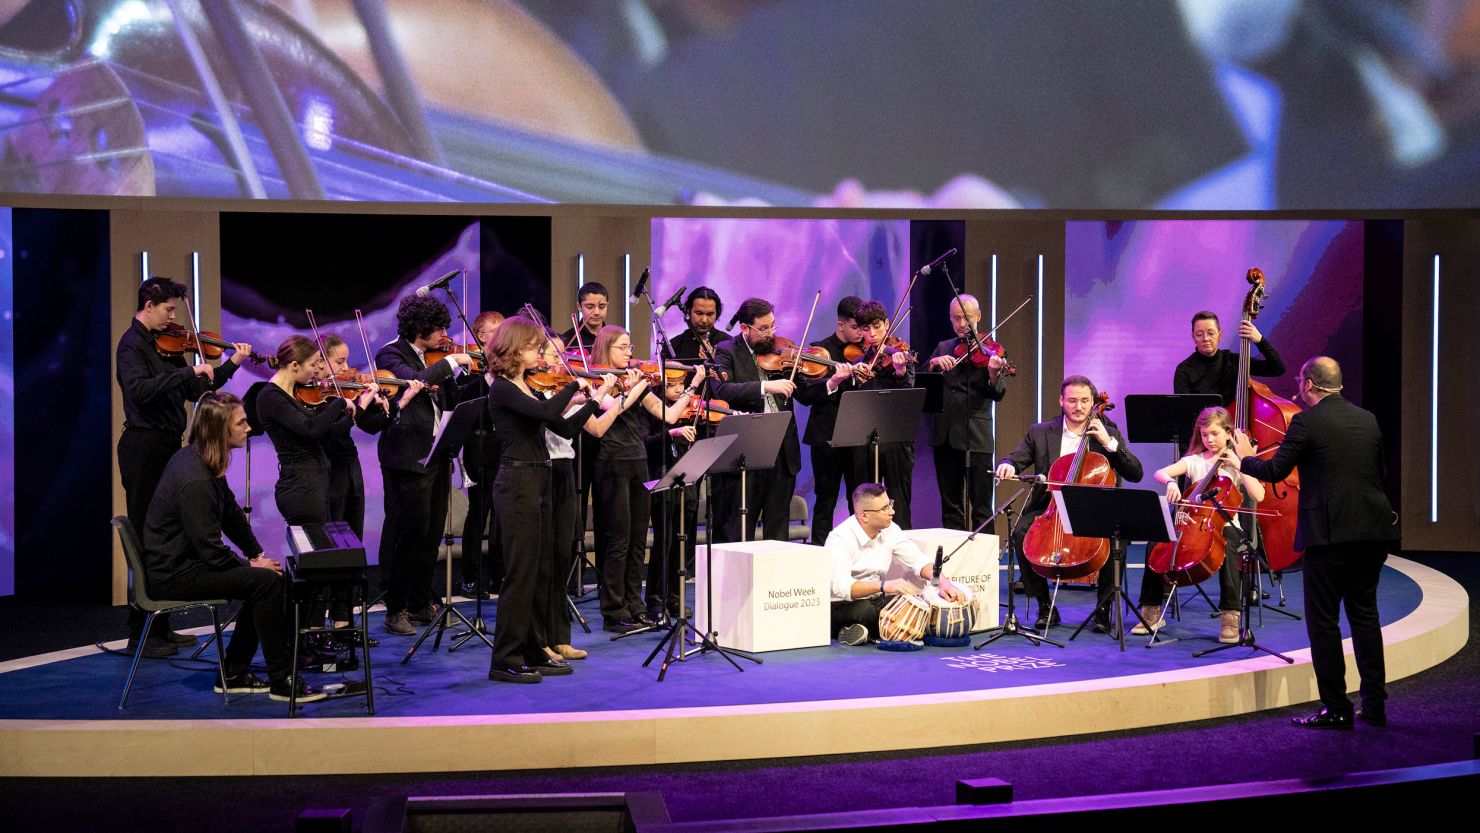 The Dream Orchestra started with just 13 members. Now there are more than 400, including this group performing at a Nobel Foundation event in Gothenburg, Sweden, in December.